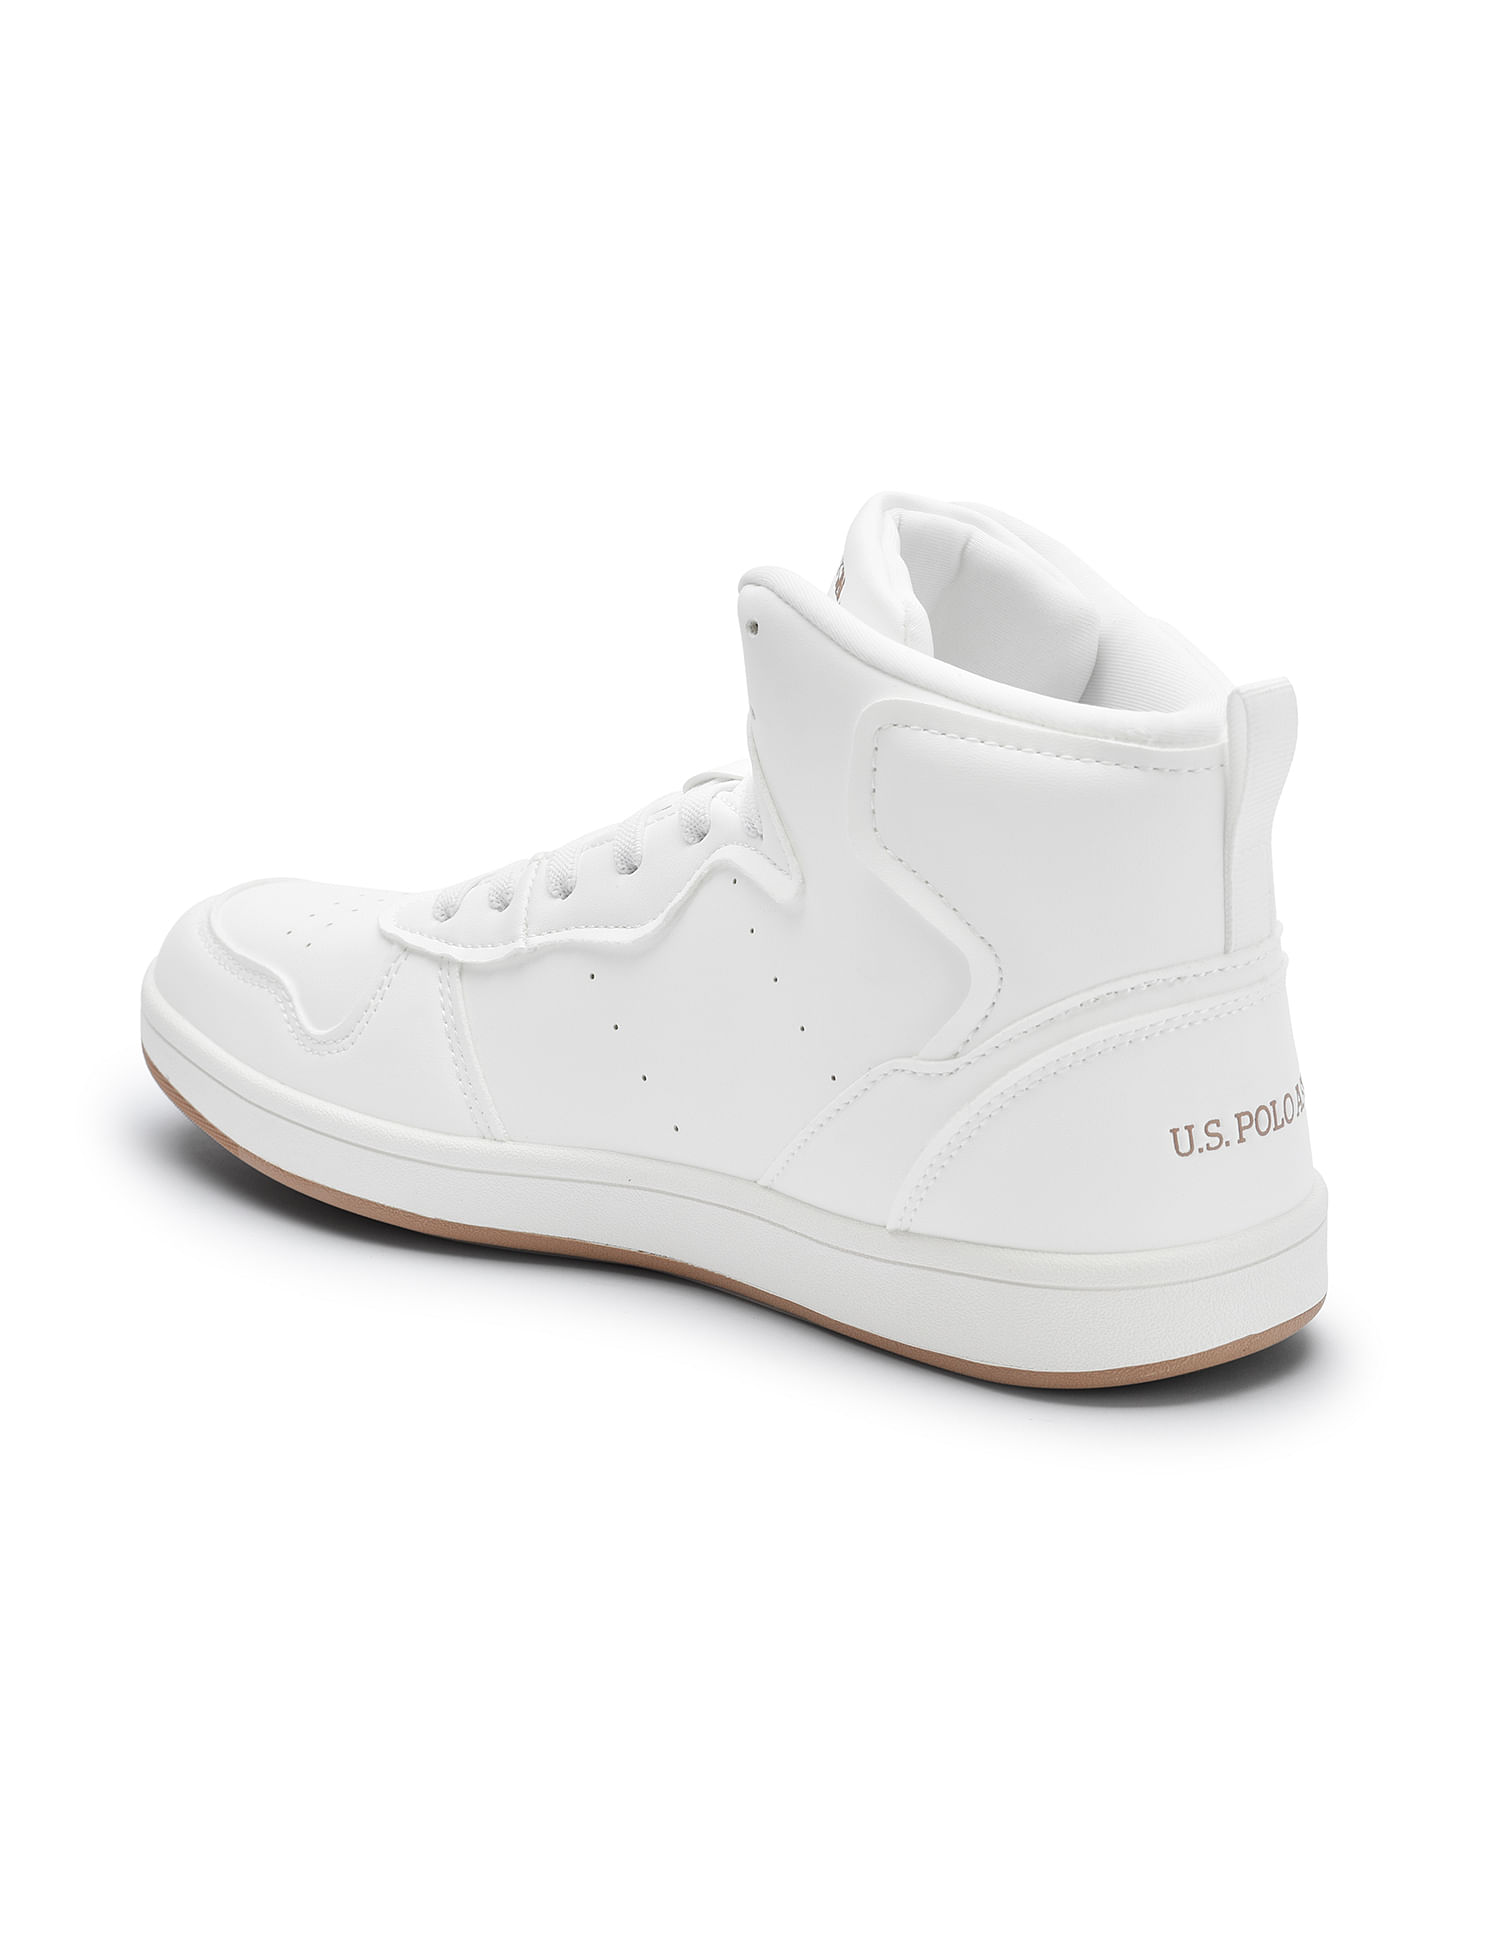 FILA WX-120 White - Leather Sneakers - High Top Sneakers - Lulus